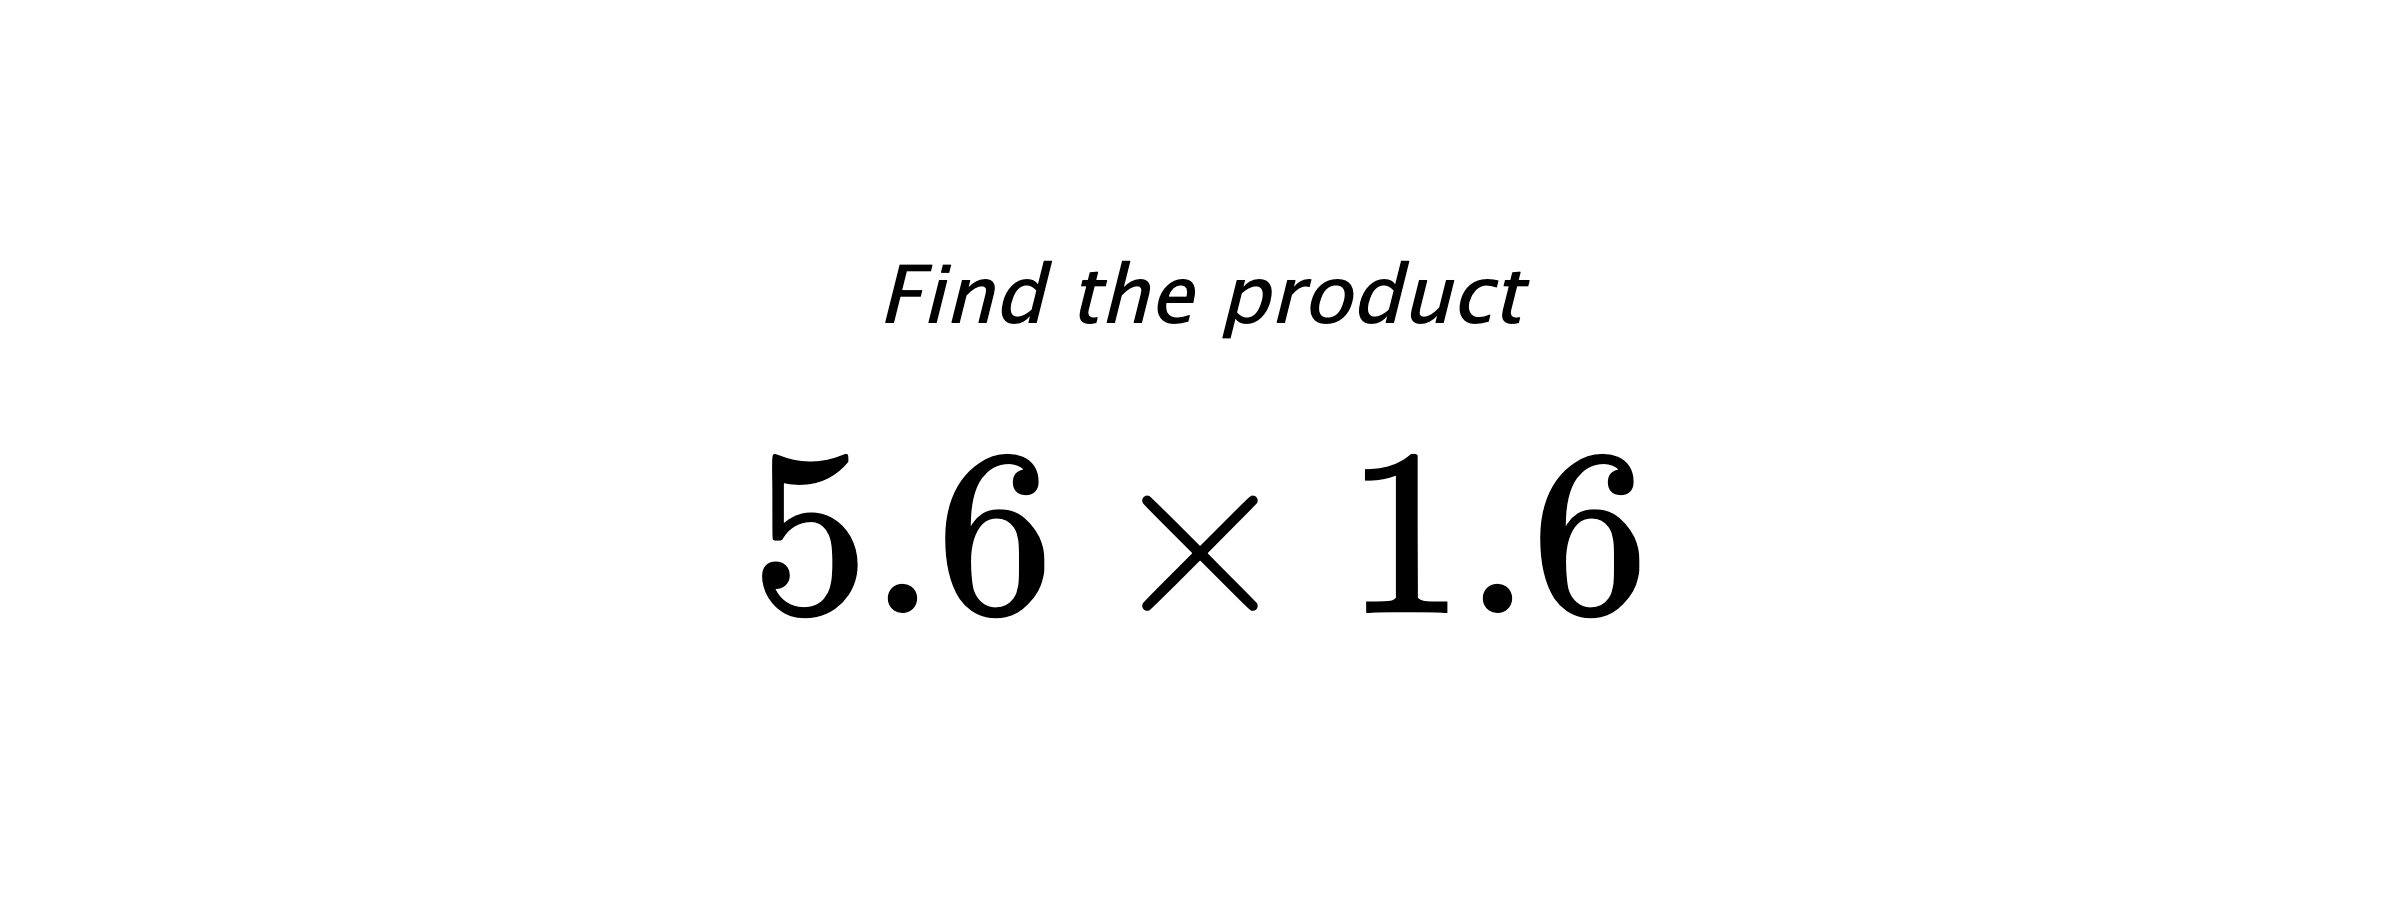 Find the product $ 5.6 \times 1.6 $